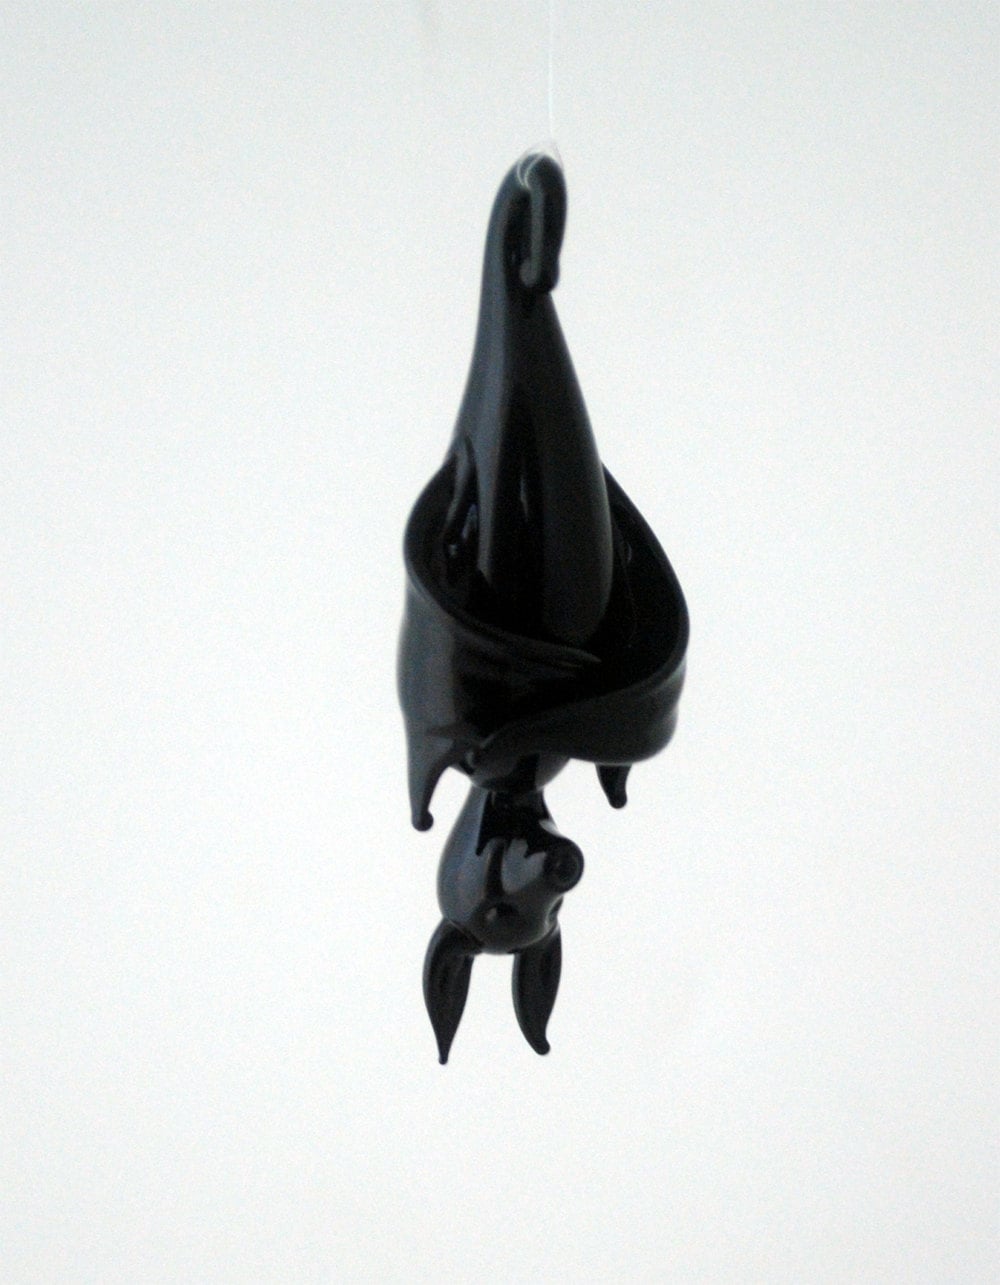 Glass Black Sleeping Bat Sculpture (with Folded Wings)